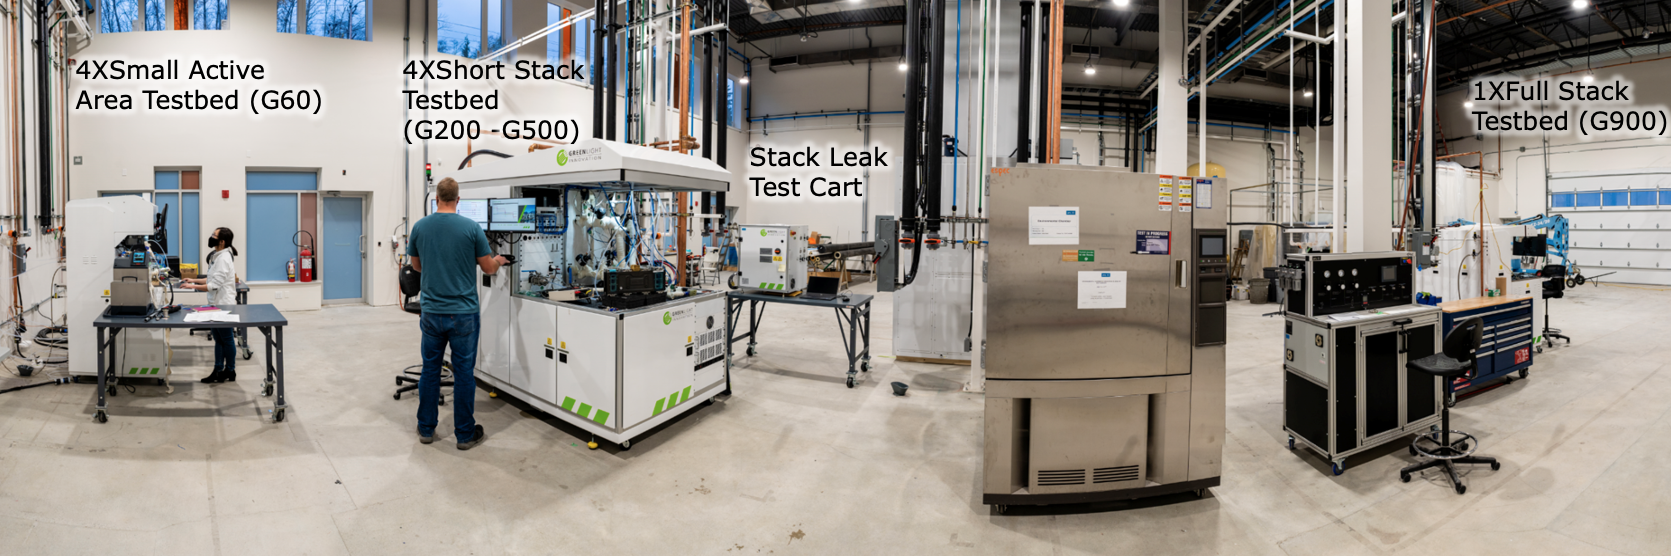 AVL Fuel Cell Testing Facility Explained